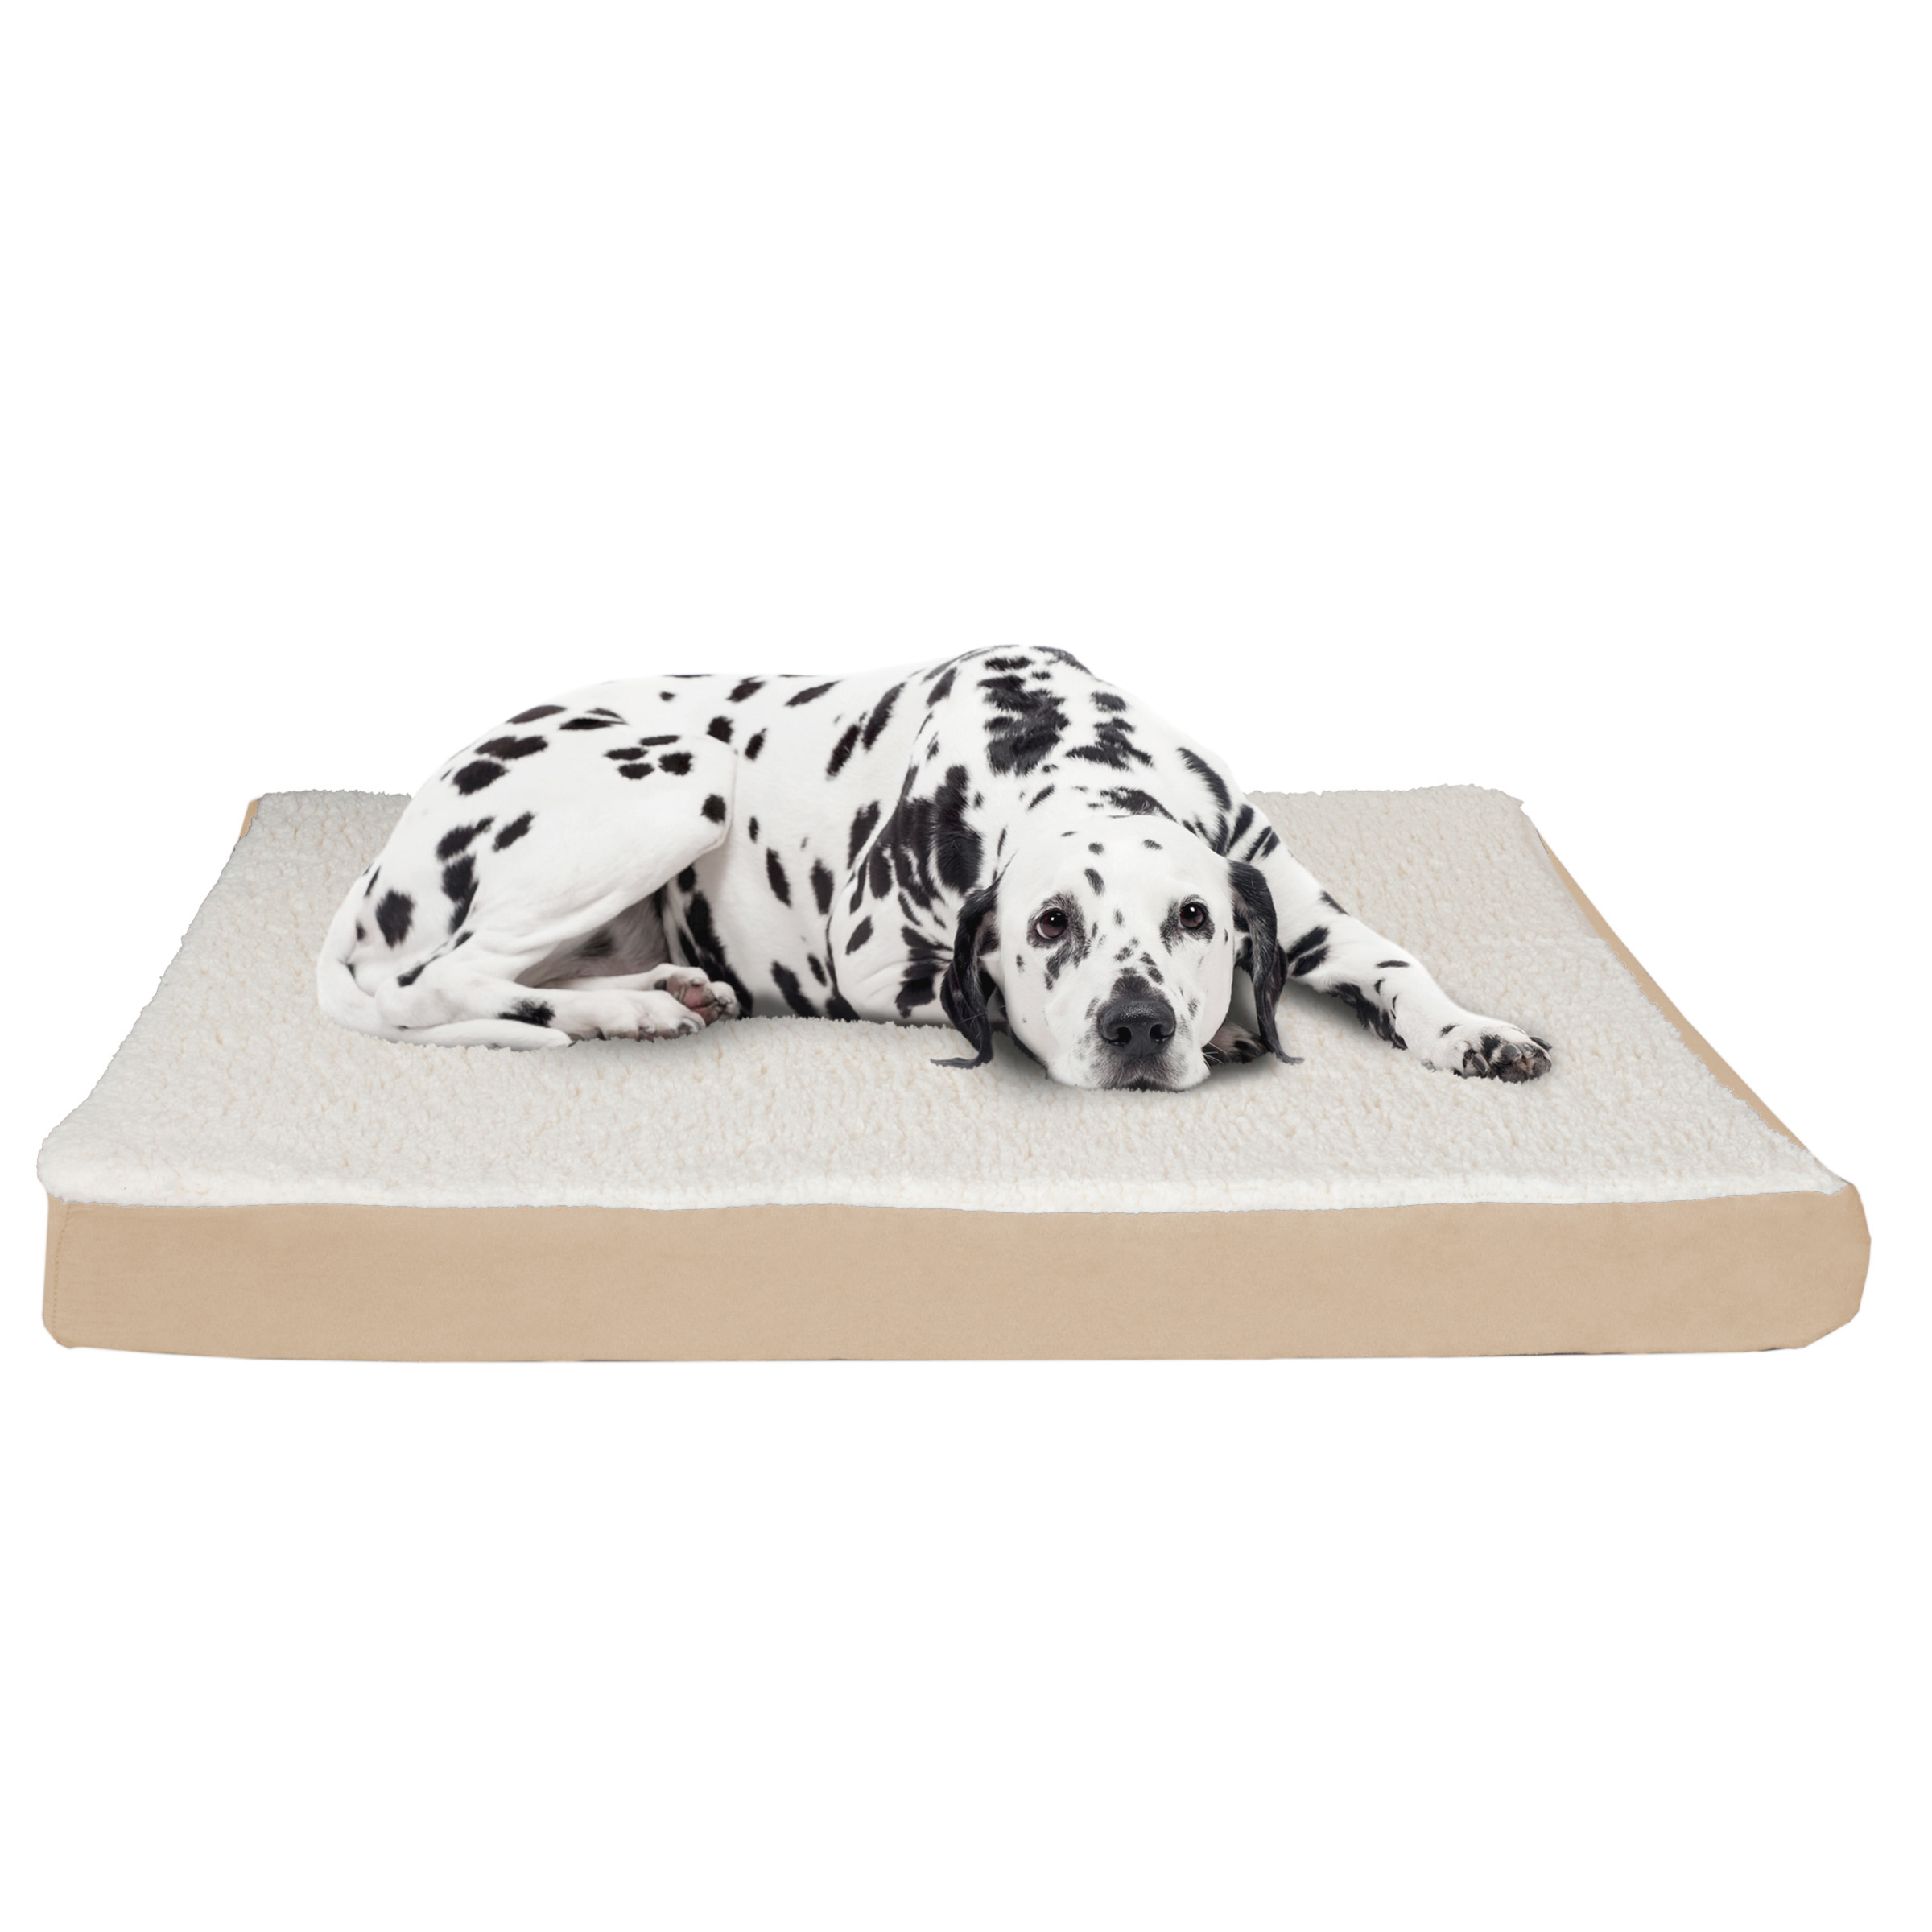 Orthopedic Dog Bed Memory Foam Cozy Sherpa 44 X 35 X 4 Washable Cover XL - Brown